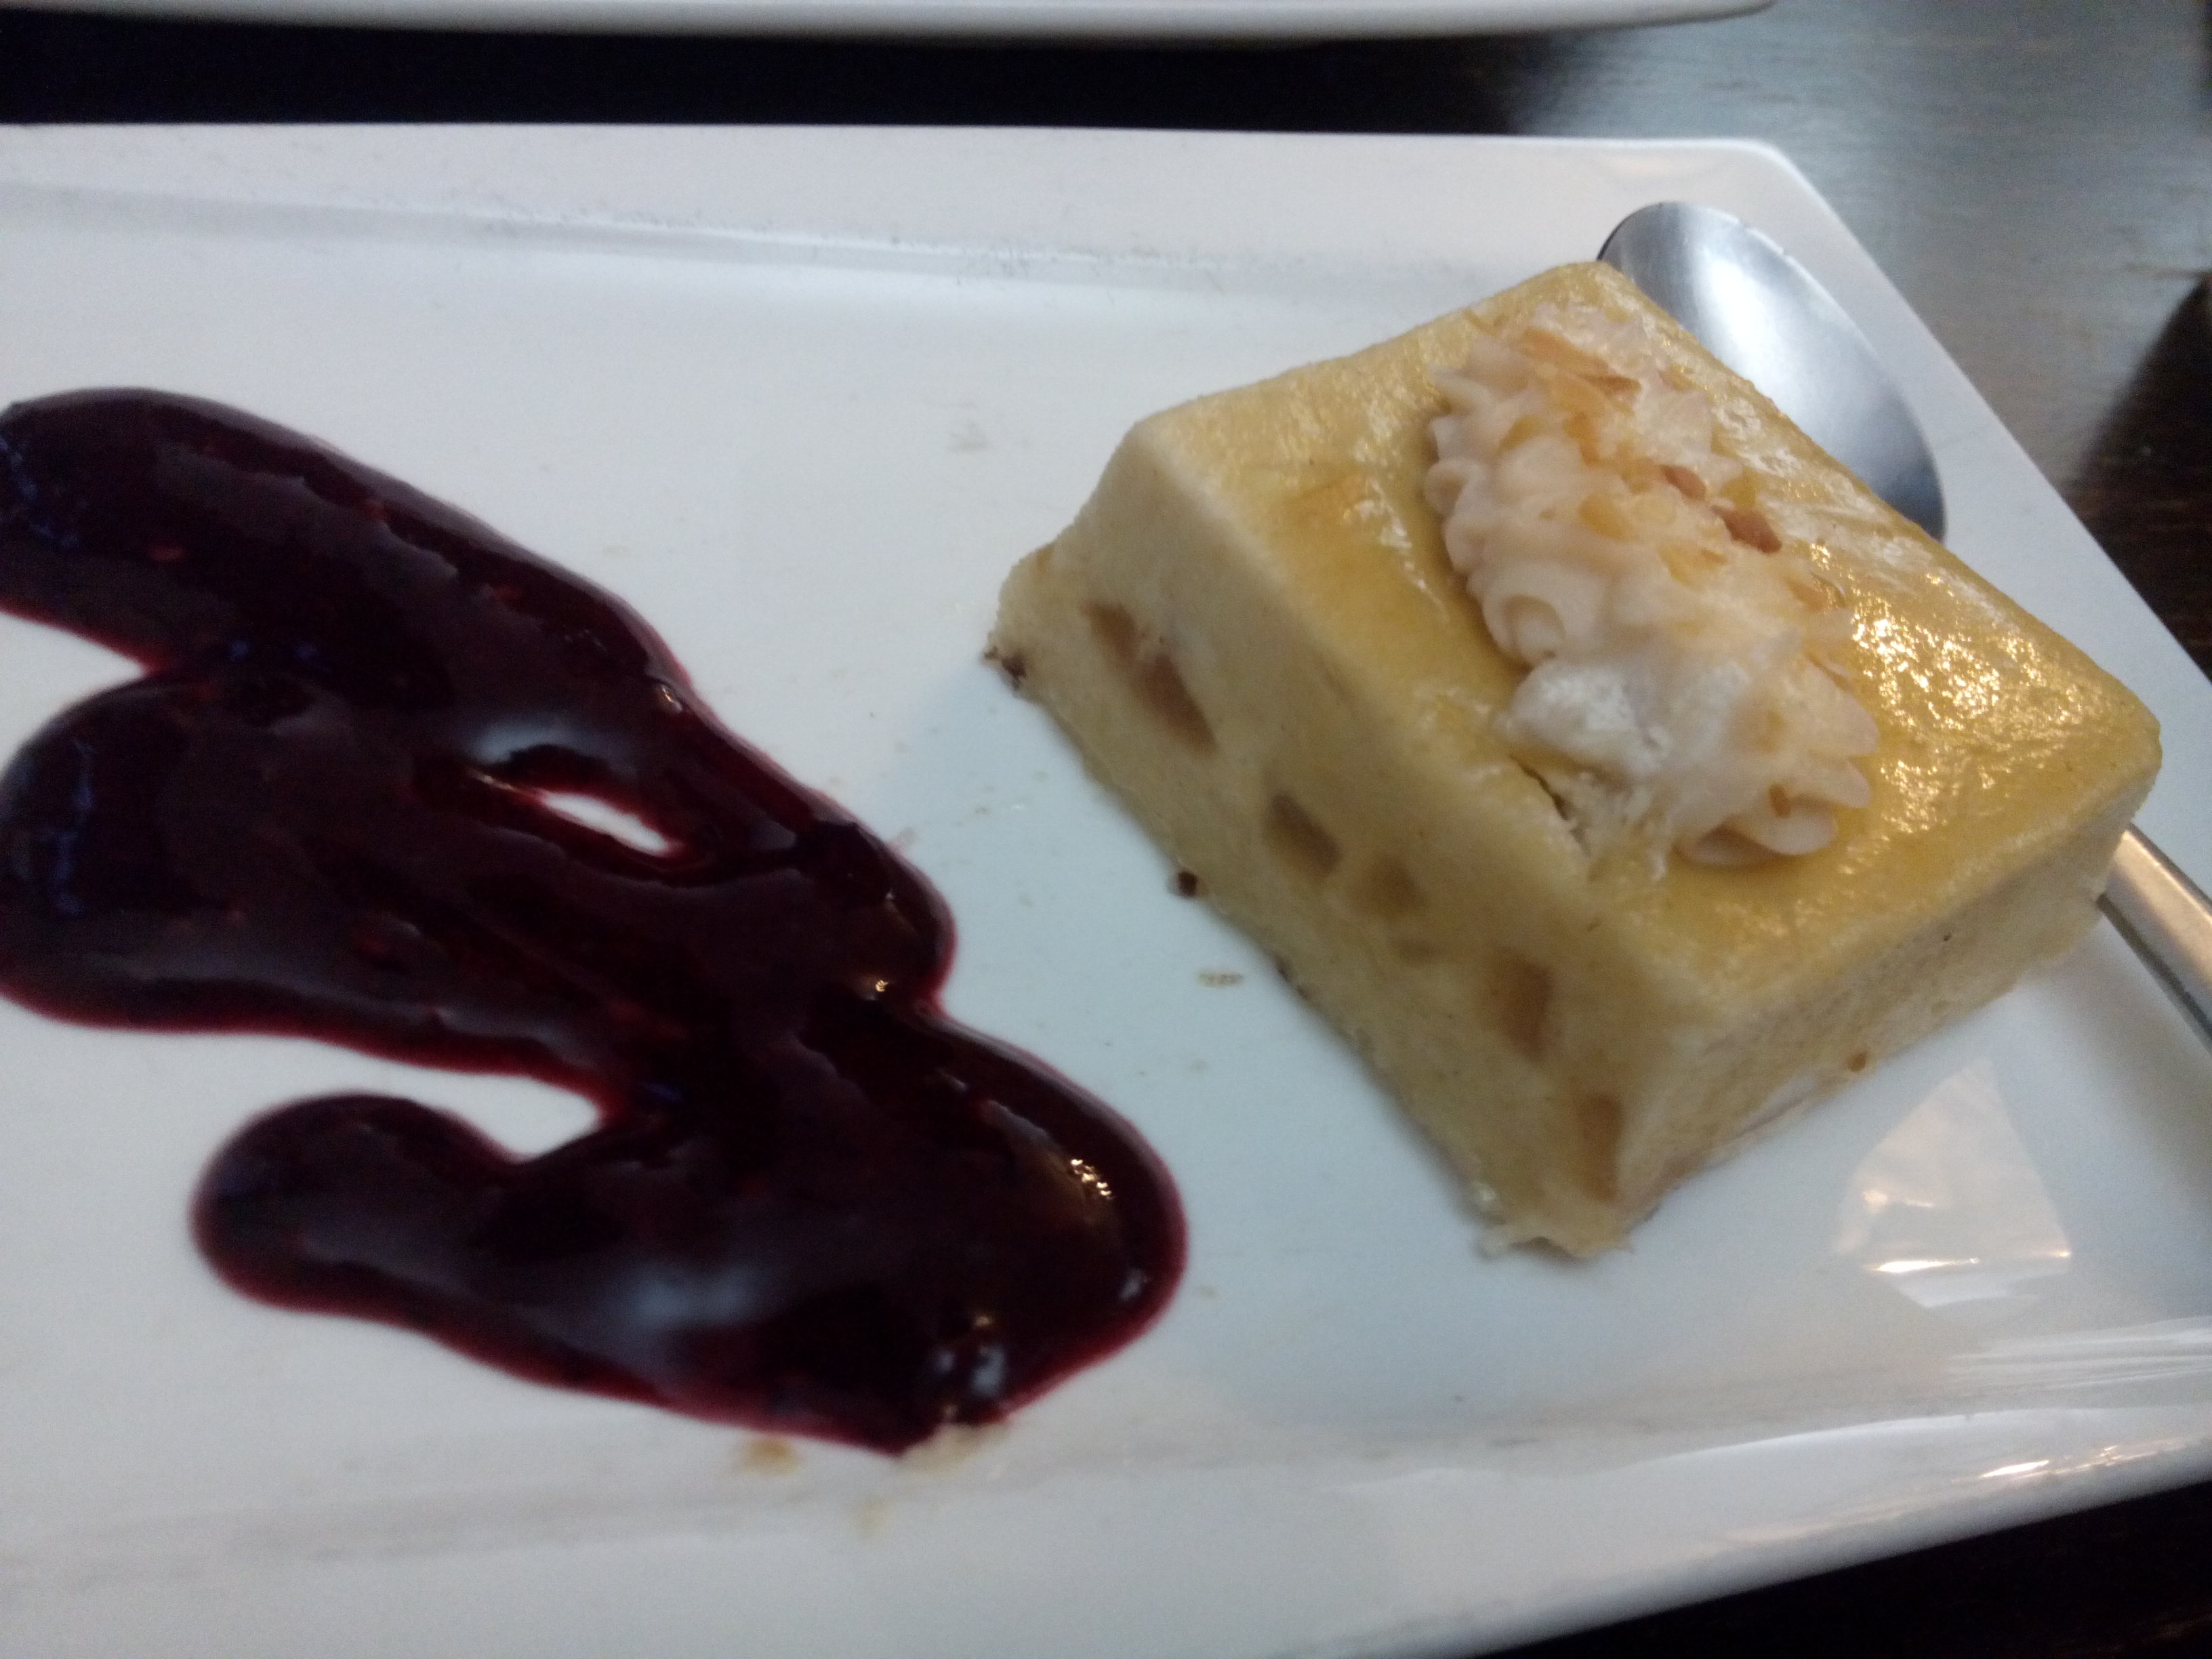 A yellow square cake next to a blob of fruity sauce